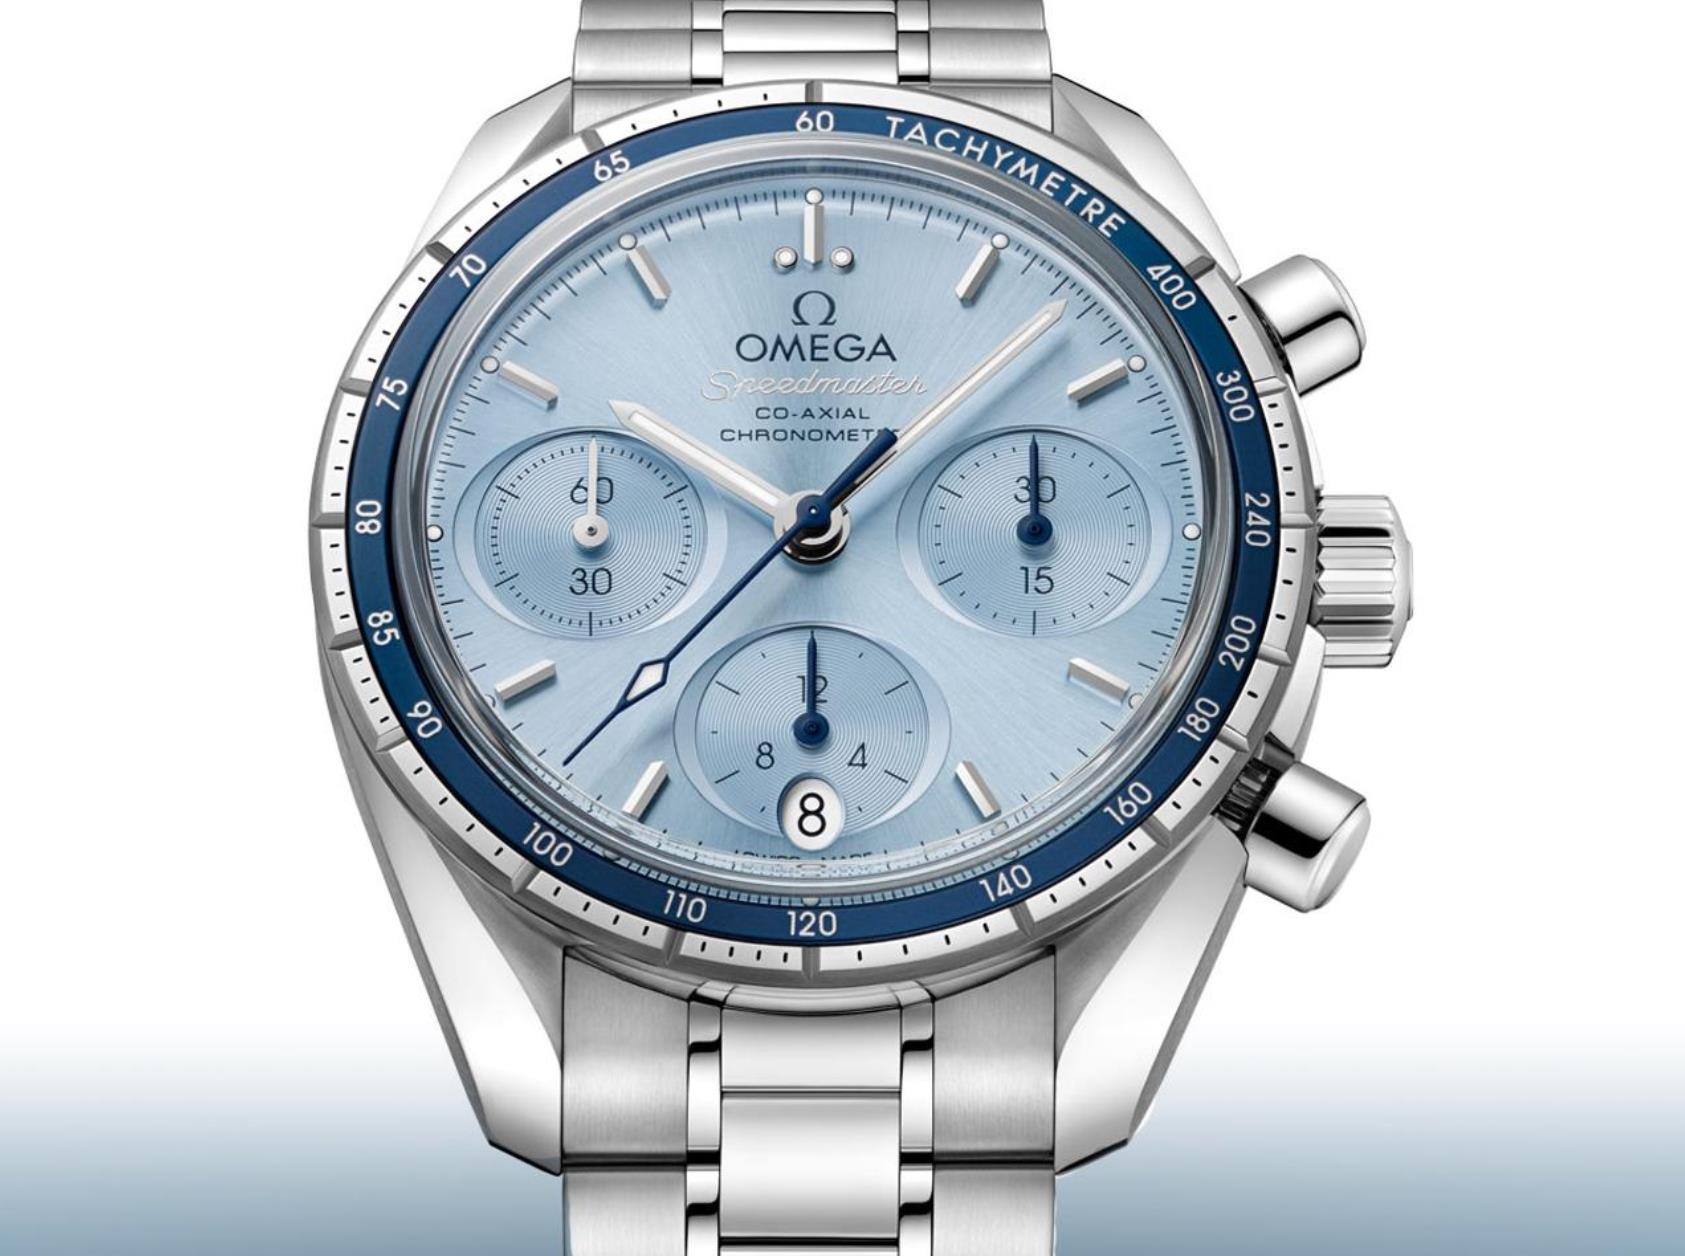 The light blue dial fake watch has a date window.